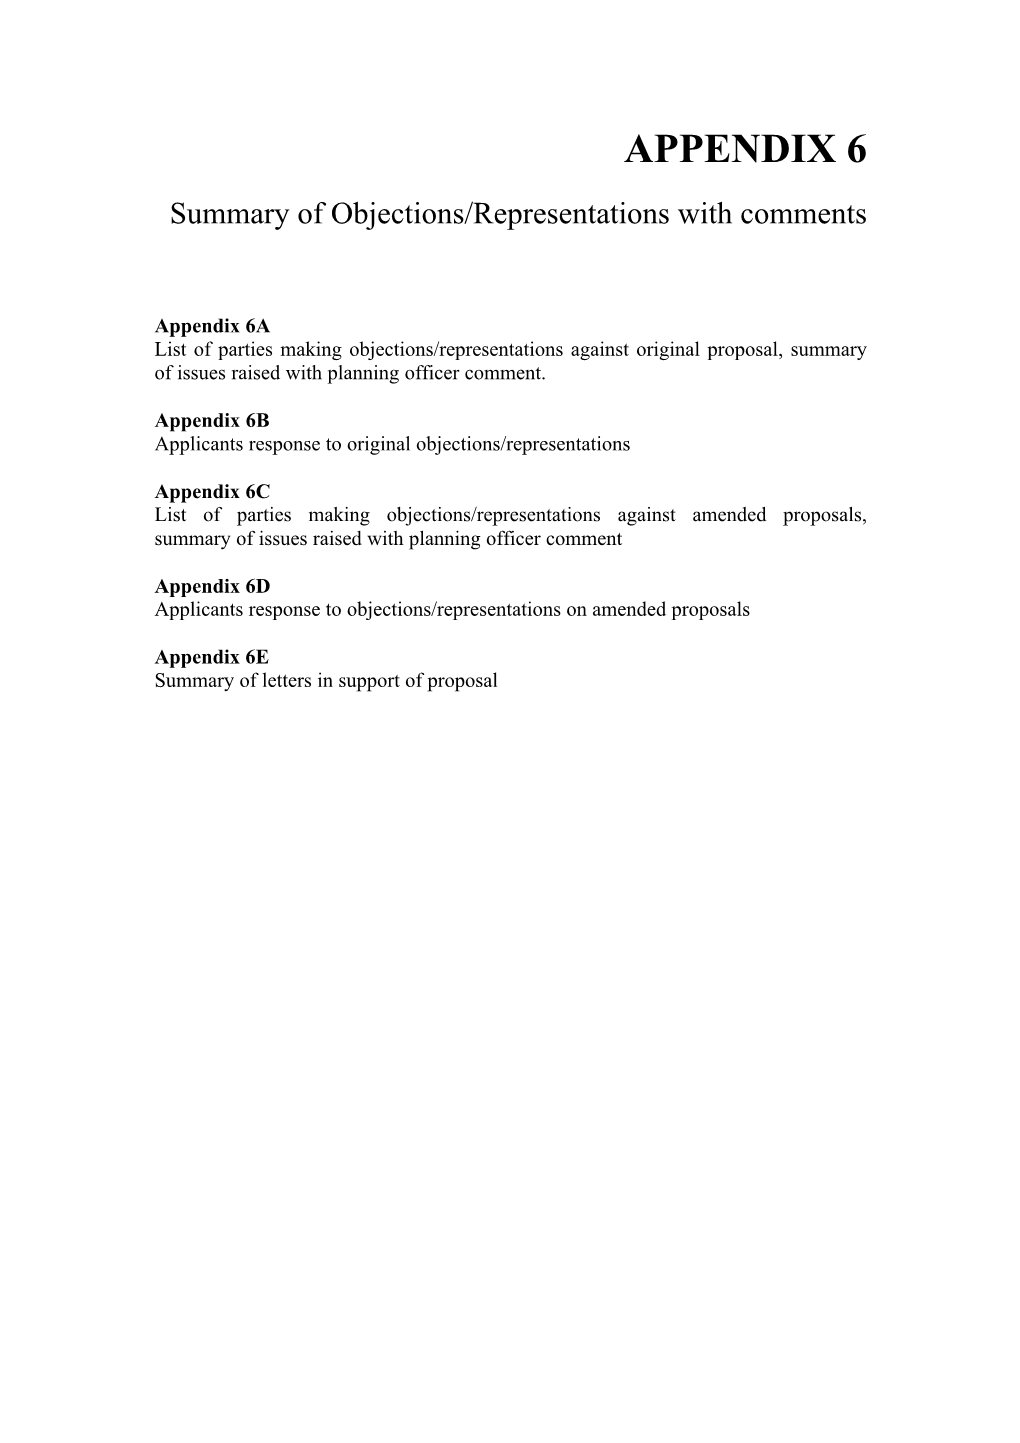 APPENDIX 6 Summary of Objections/Representations with Comments